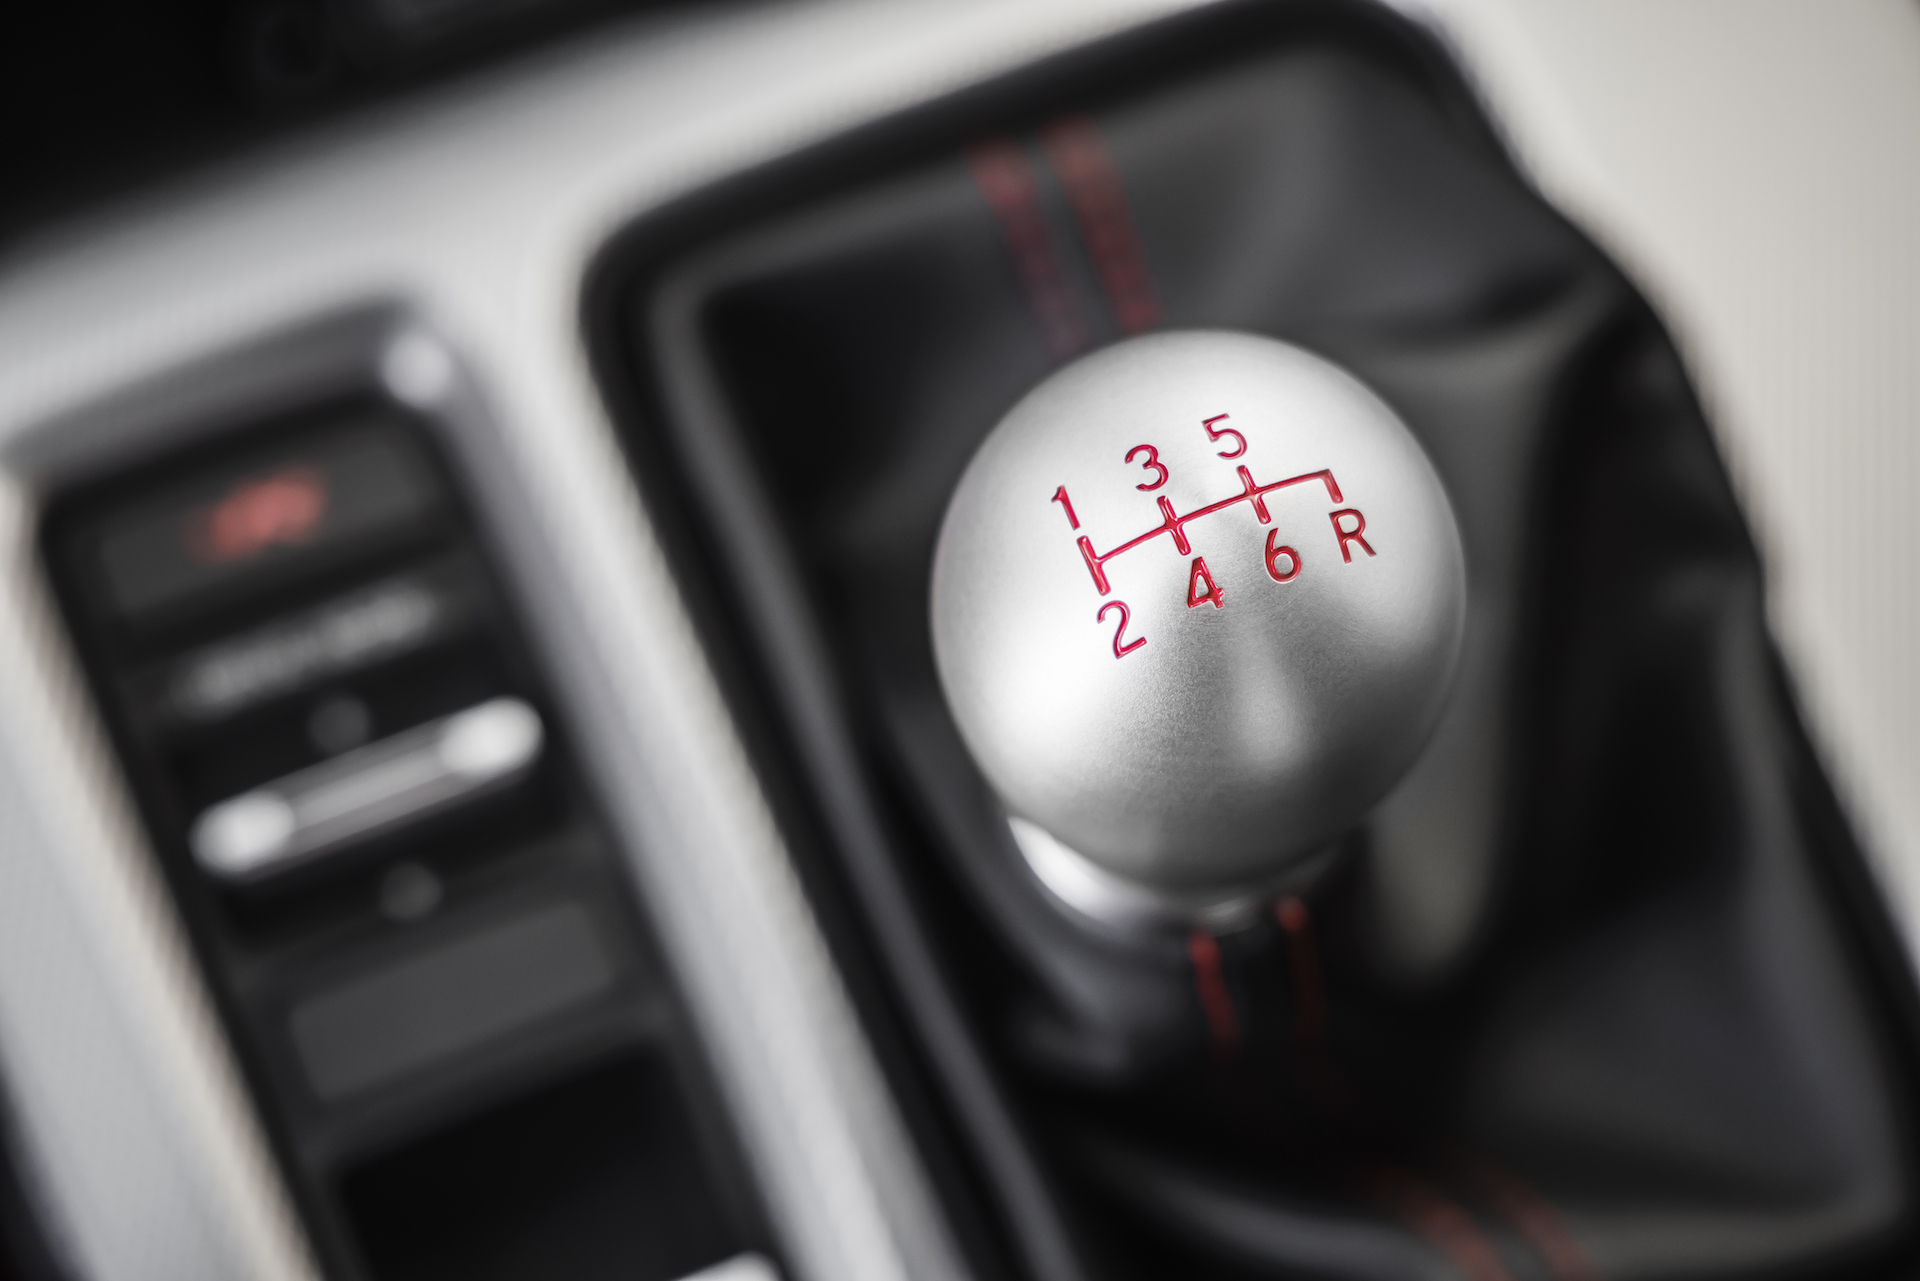 How to Drive a Stick Shift - How to Drive a Manual Transmission Car